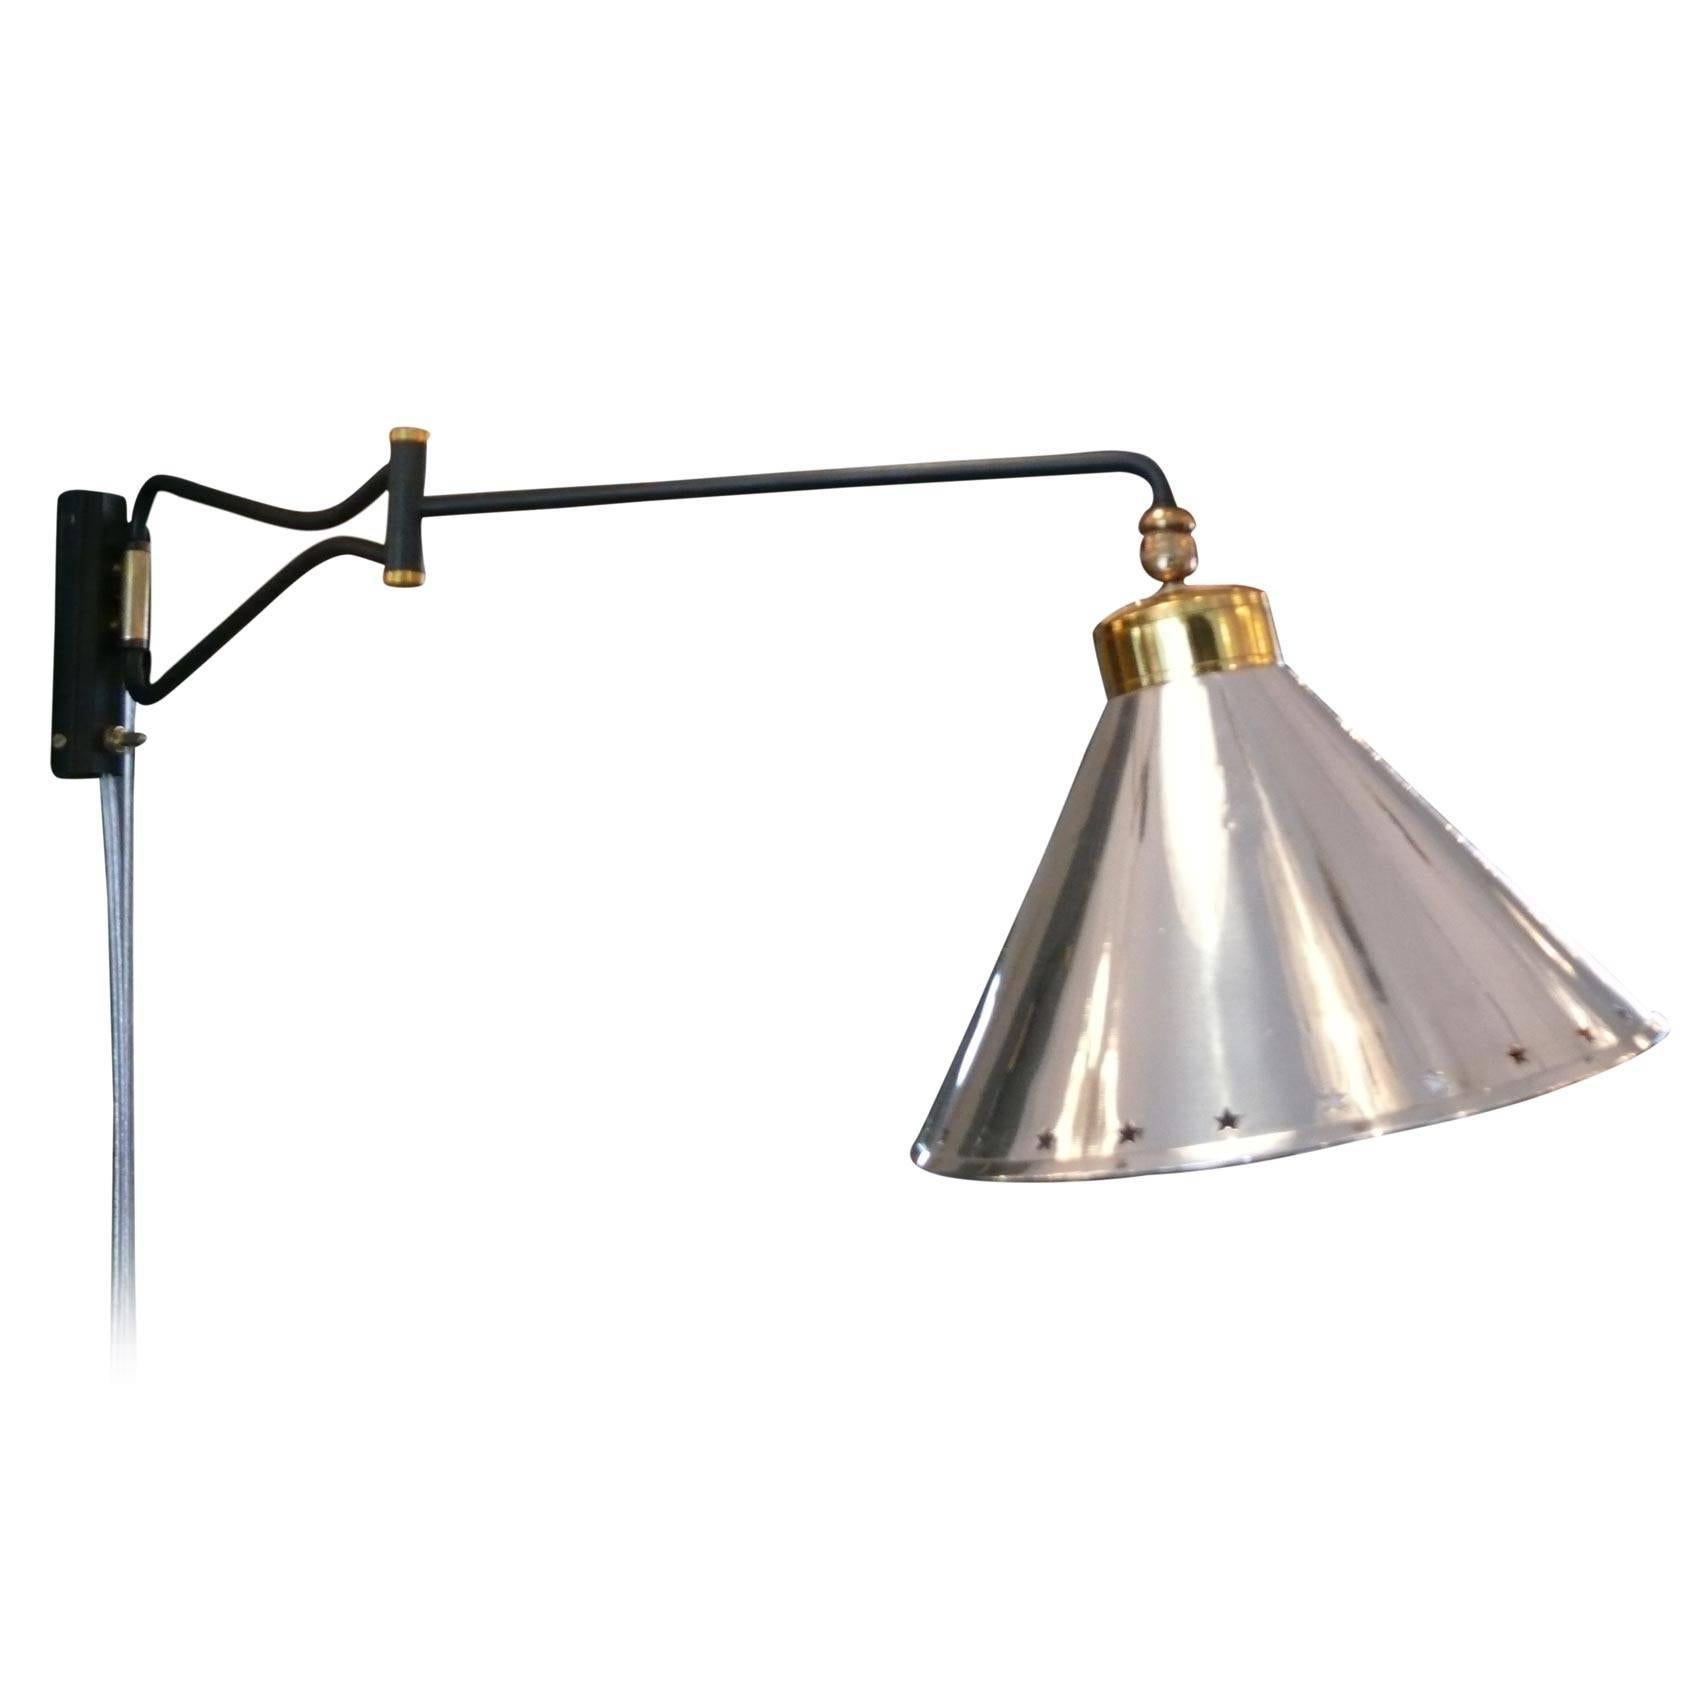 Lunel articulating arm sconce with polished aluminum shade with perforated star detailing and brass hardware. Shade pivots and articulates. Professionally rewired.